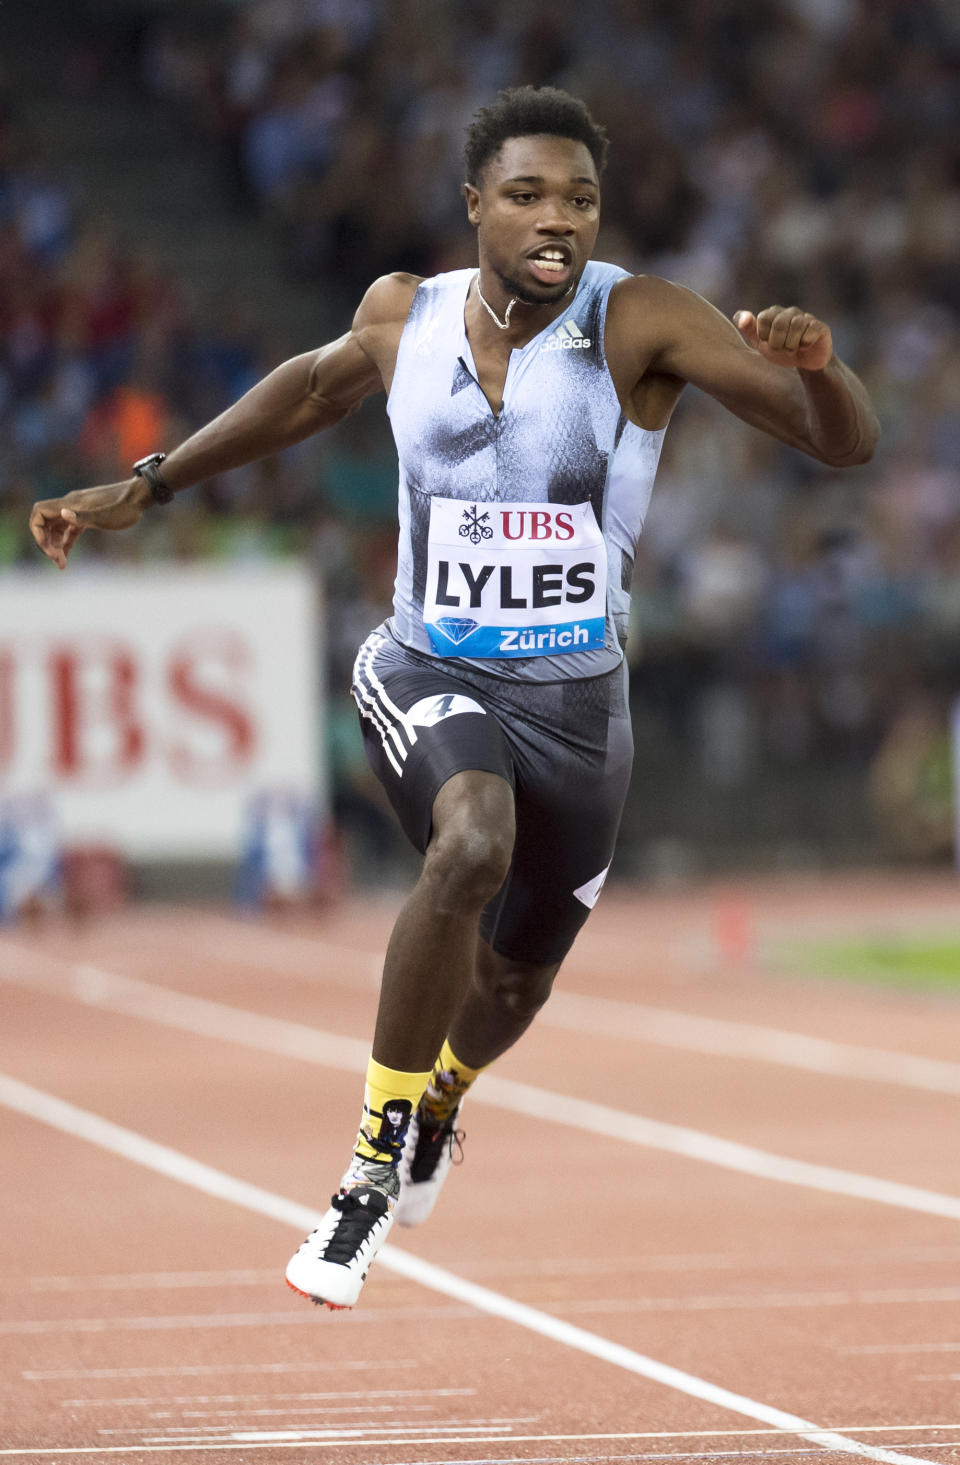 FILE - In this Aug. 29, 2019, file photo, Noah Lyles, of the United States, competes in the men's 100m race during the Weltklasse IAAF Diamond League international athletics meet in Zurich, Switzerland. The most promising signal that track and field remains in good hands even after Usain Bolt’s retirement comes from a 22-year-old American named Noah Lyles who appreciates the Jamaican superstar more for what he did after his races than during them. When Lyles spends time studying Bolt on video, he looks not at the lanky speedster’s form in between the lines, but at the dancing, rollicking post-race celebrations Bolt concocted to make his sport can’t-miss viewing whenever he was on the track. (Jean-Christophe Bott/Keystone via AP, File)